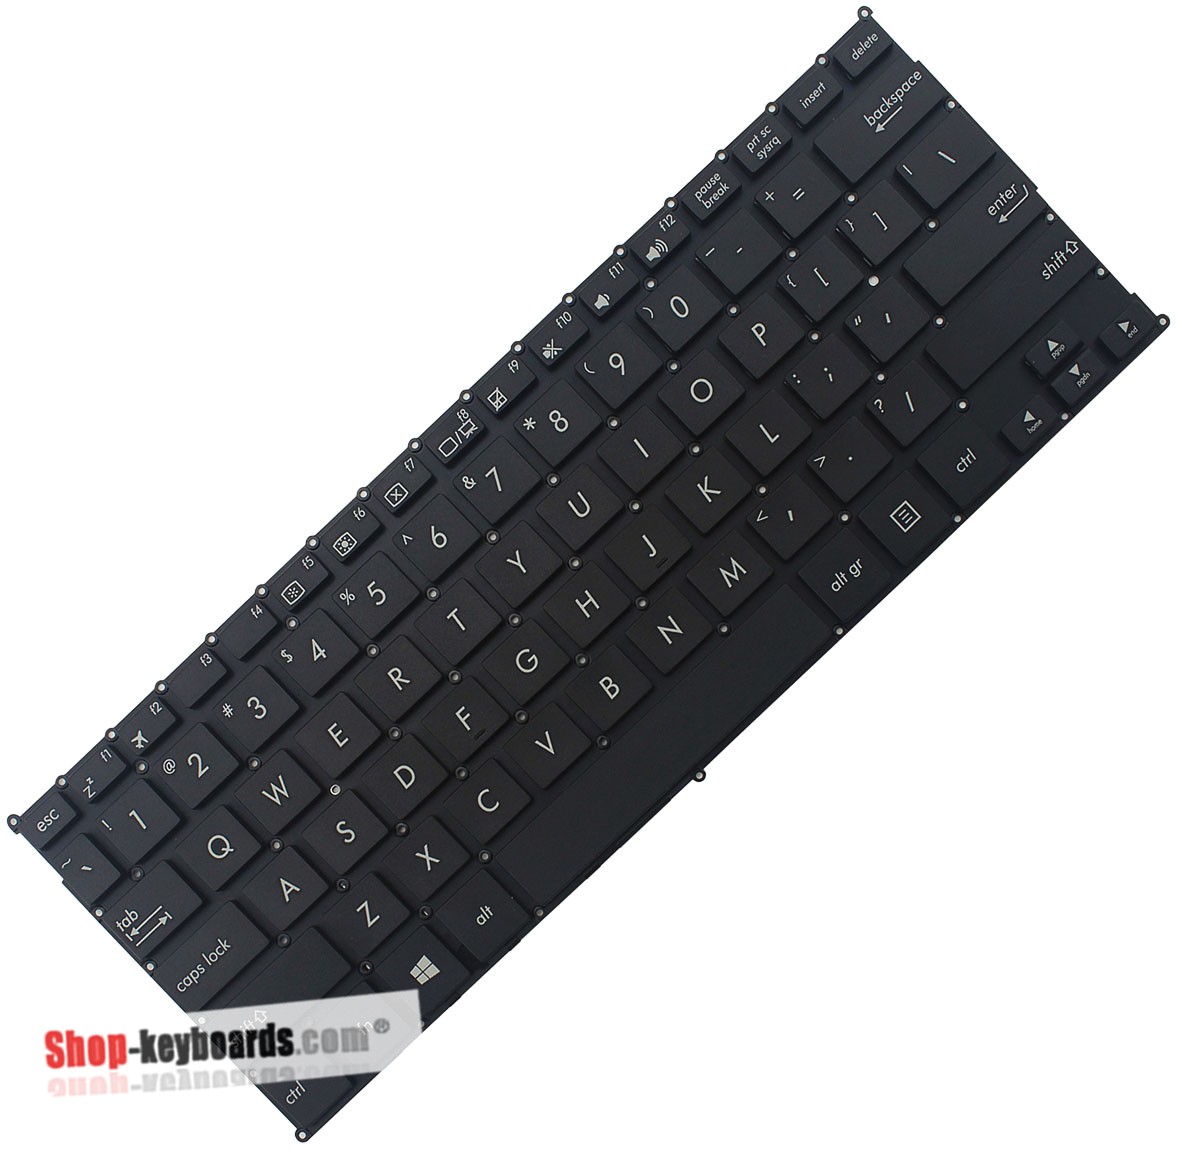 Asus 0KNL0-1122LA00 Keyboard replacement